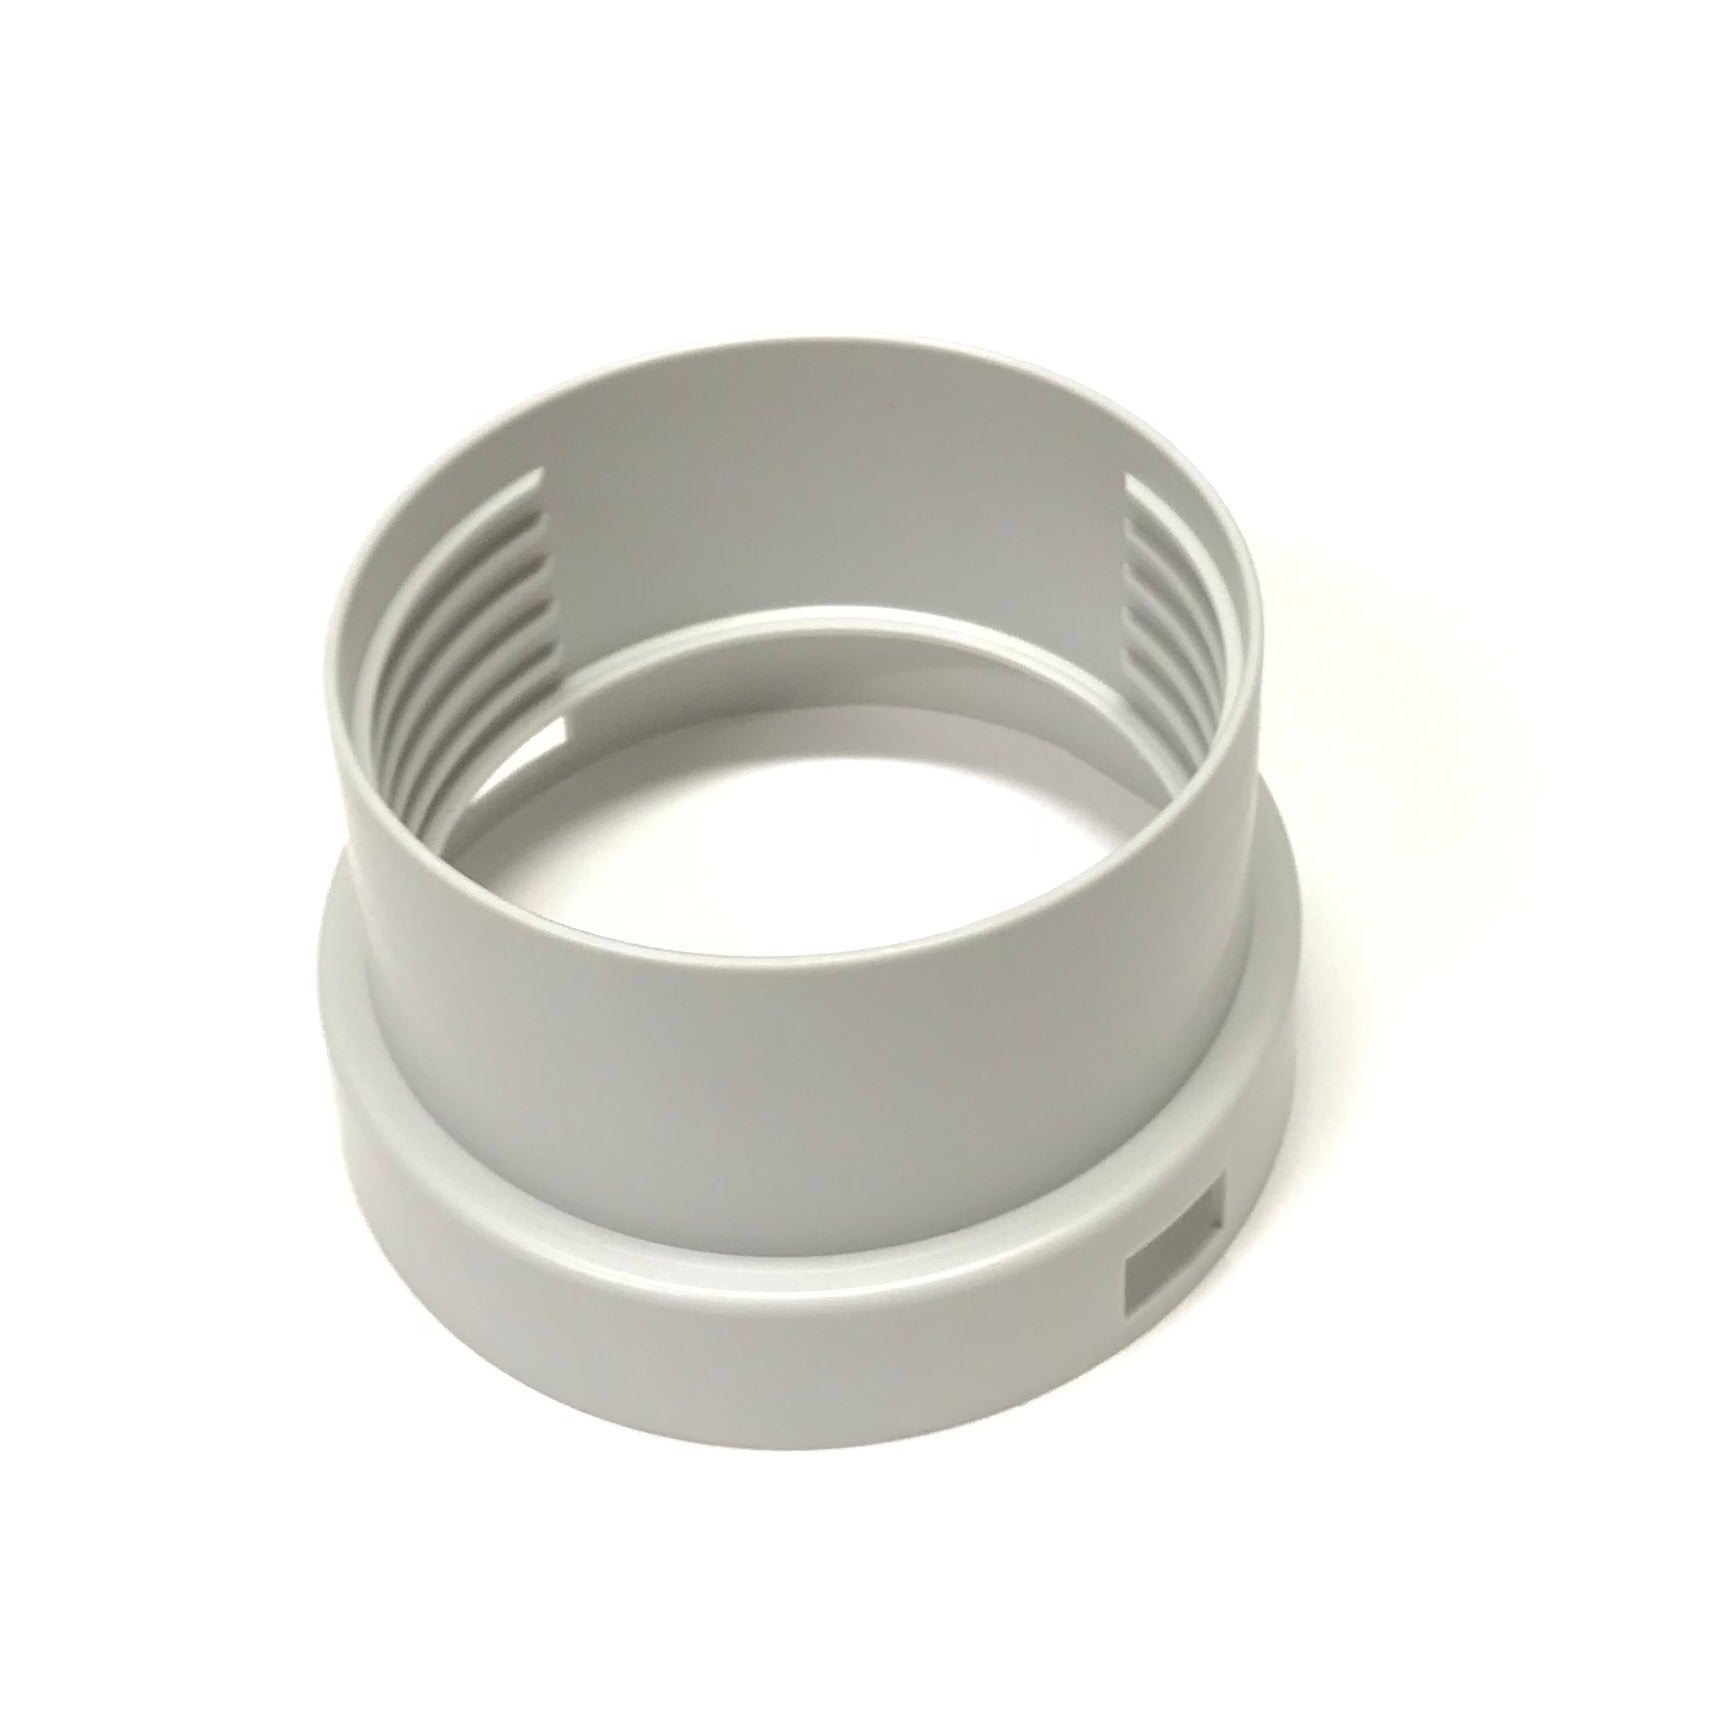 OEM Danby Air Conditioner AC Exhaust Hose Connector Originally Shipped With DPAC10099, DPAC9010